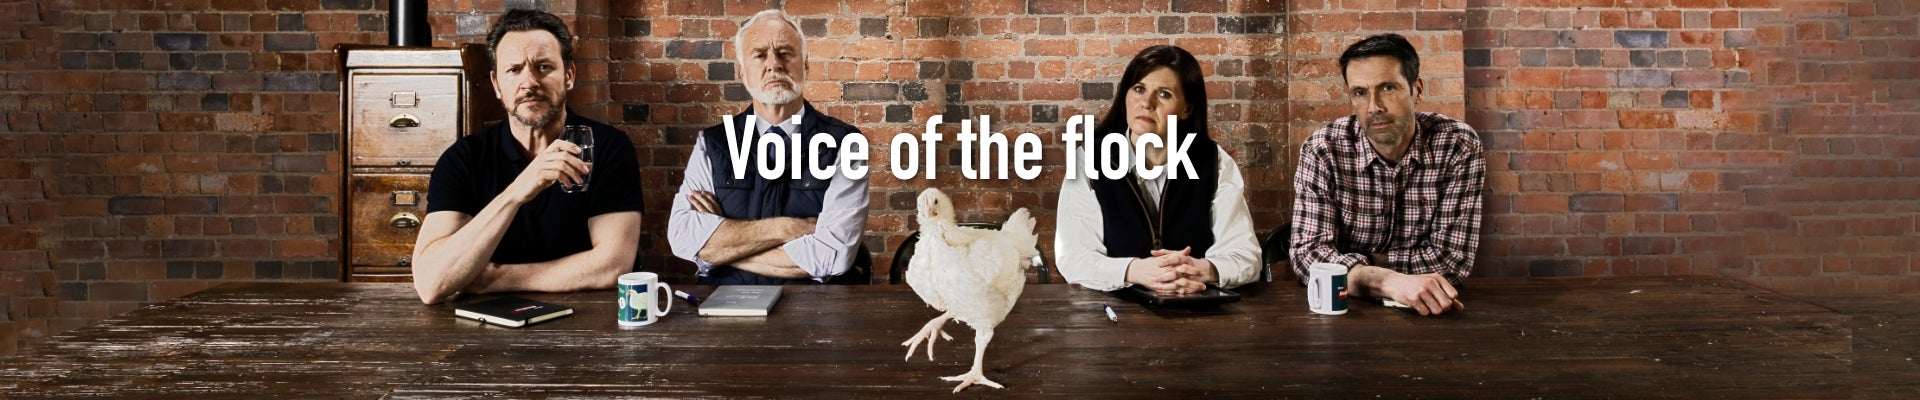 Campaign image voice of the flock